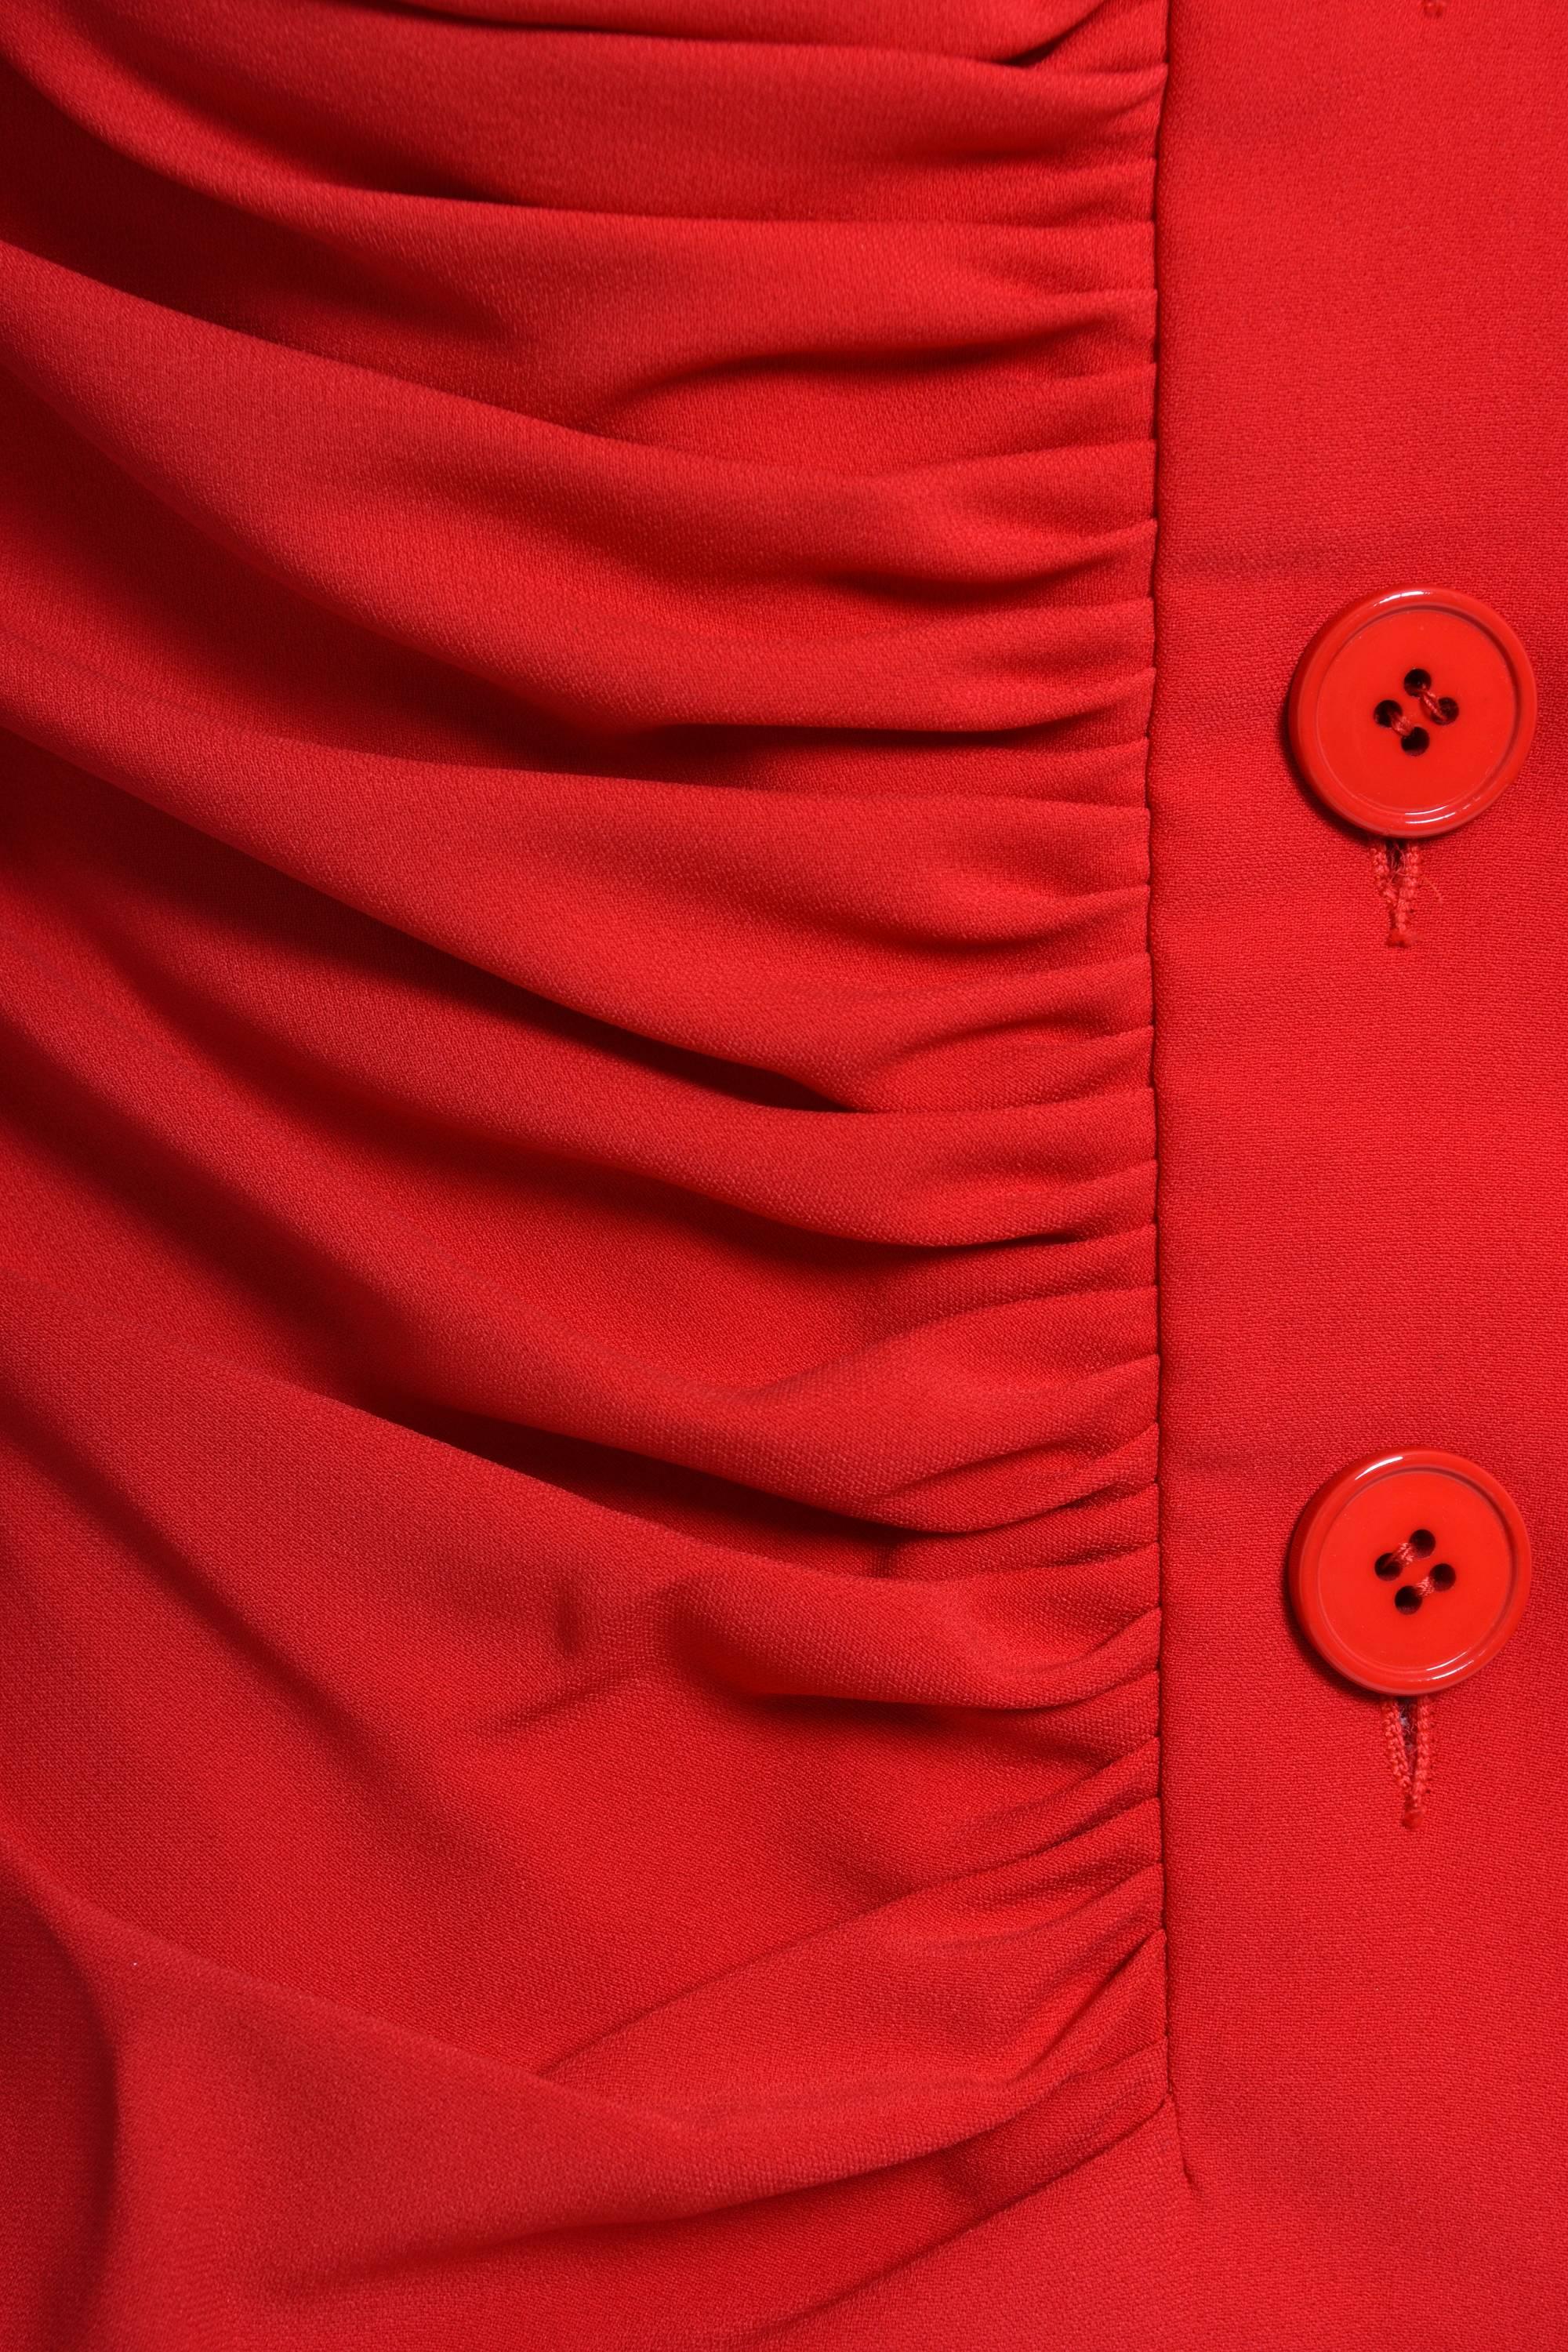 1990s GIANFRANCO FERRE' Red Draped Suit Skirt  In Excellent Condition For Sale In Milan, Italy